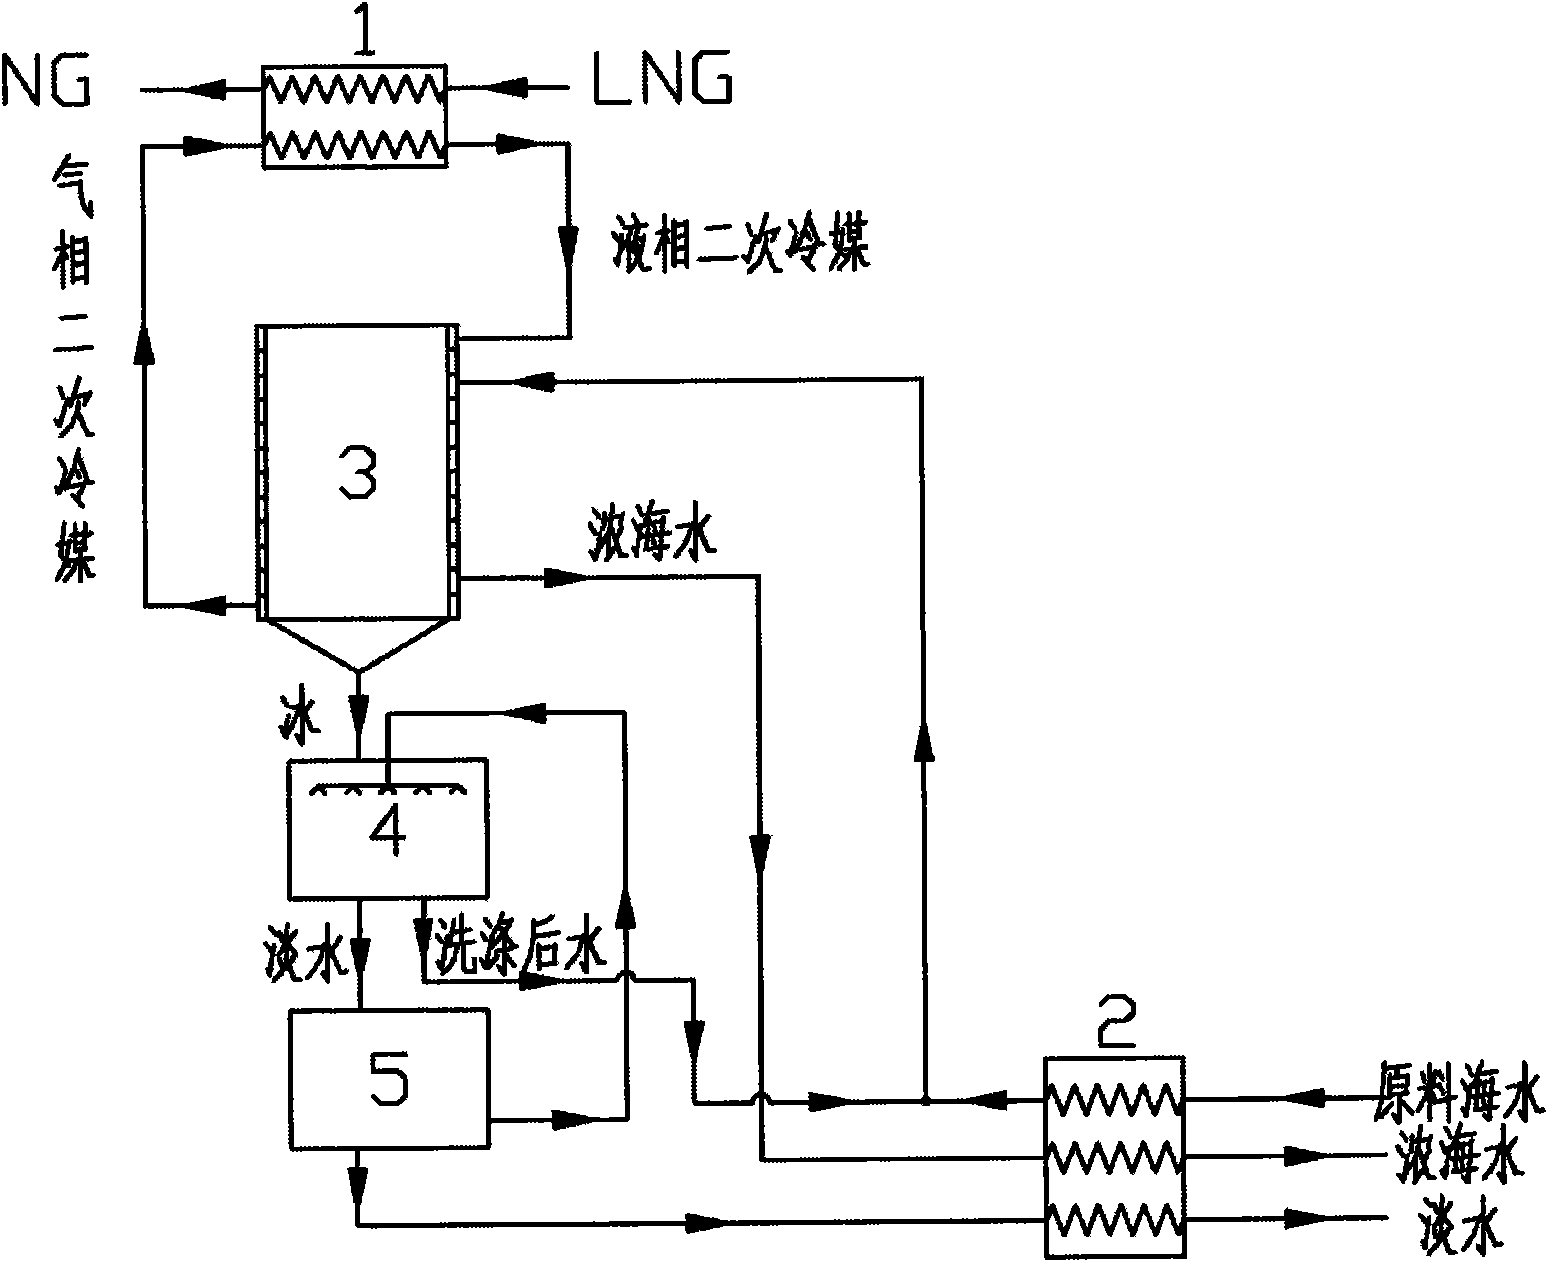 Desalting method with phase change for indirectly freeze seawater by using of liquefied natural gas refrigeration capacity